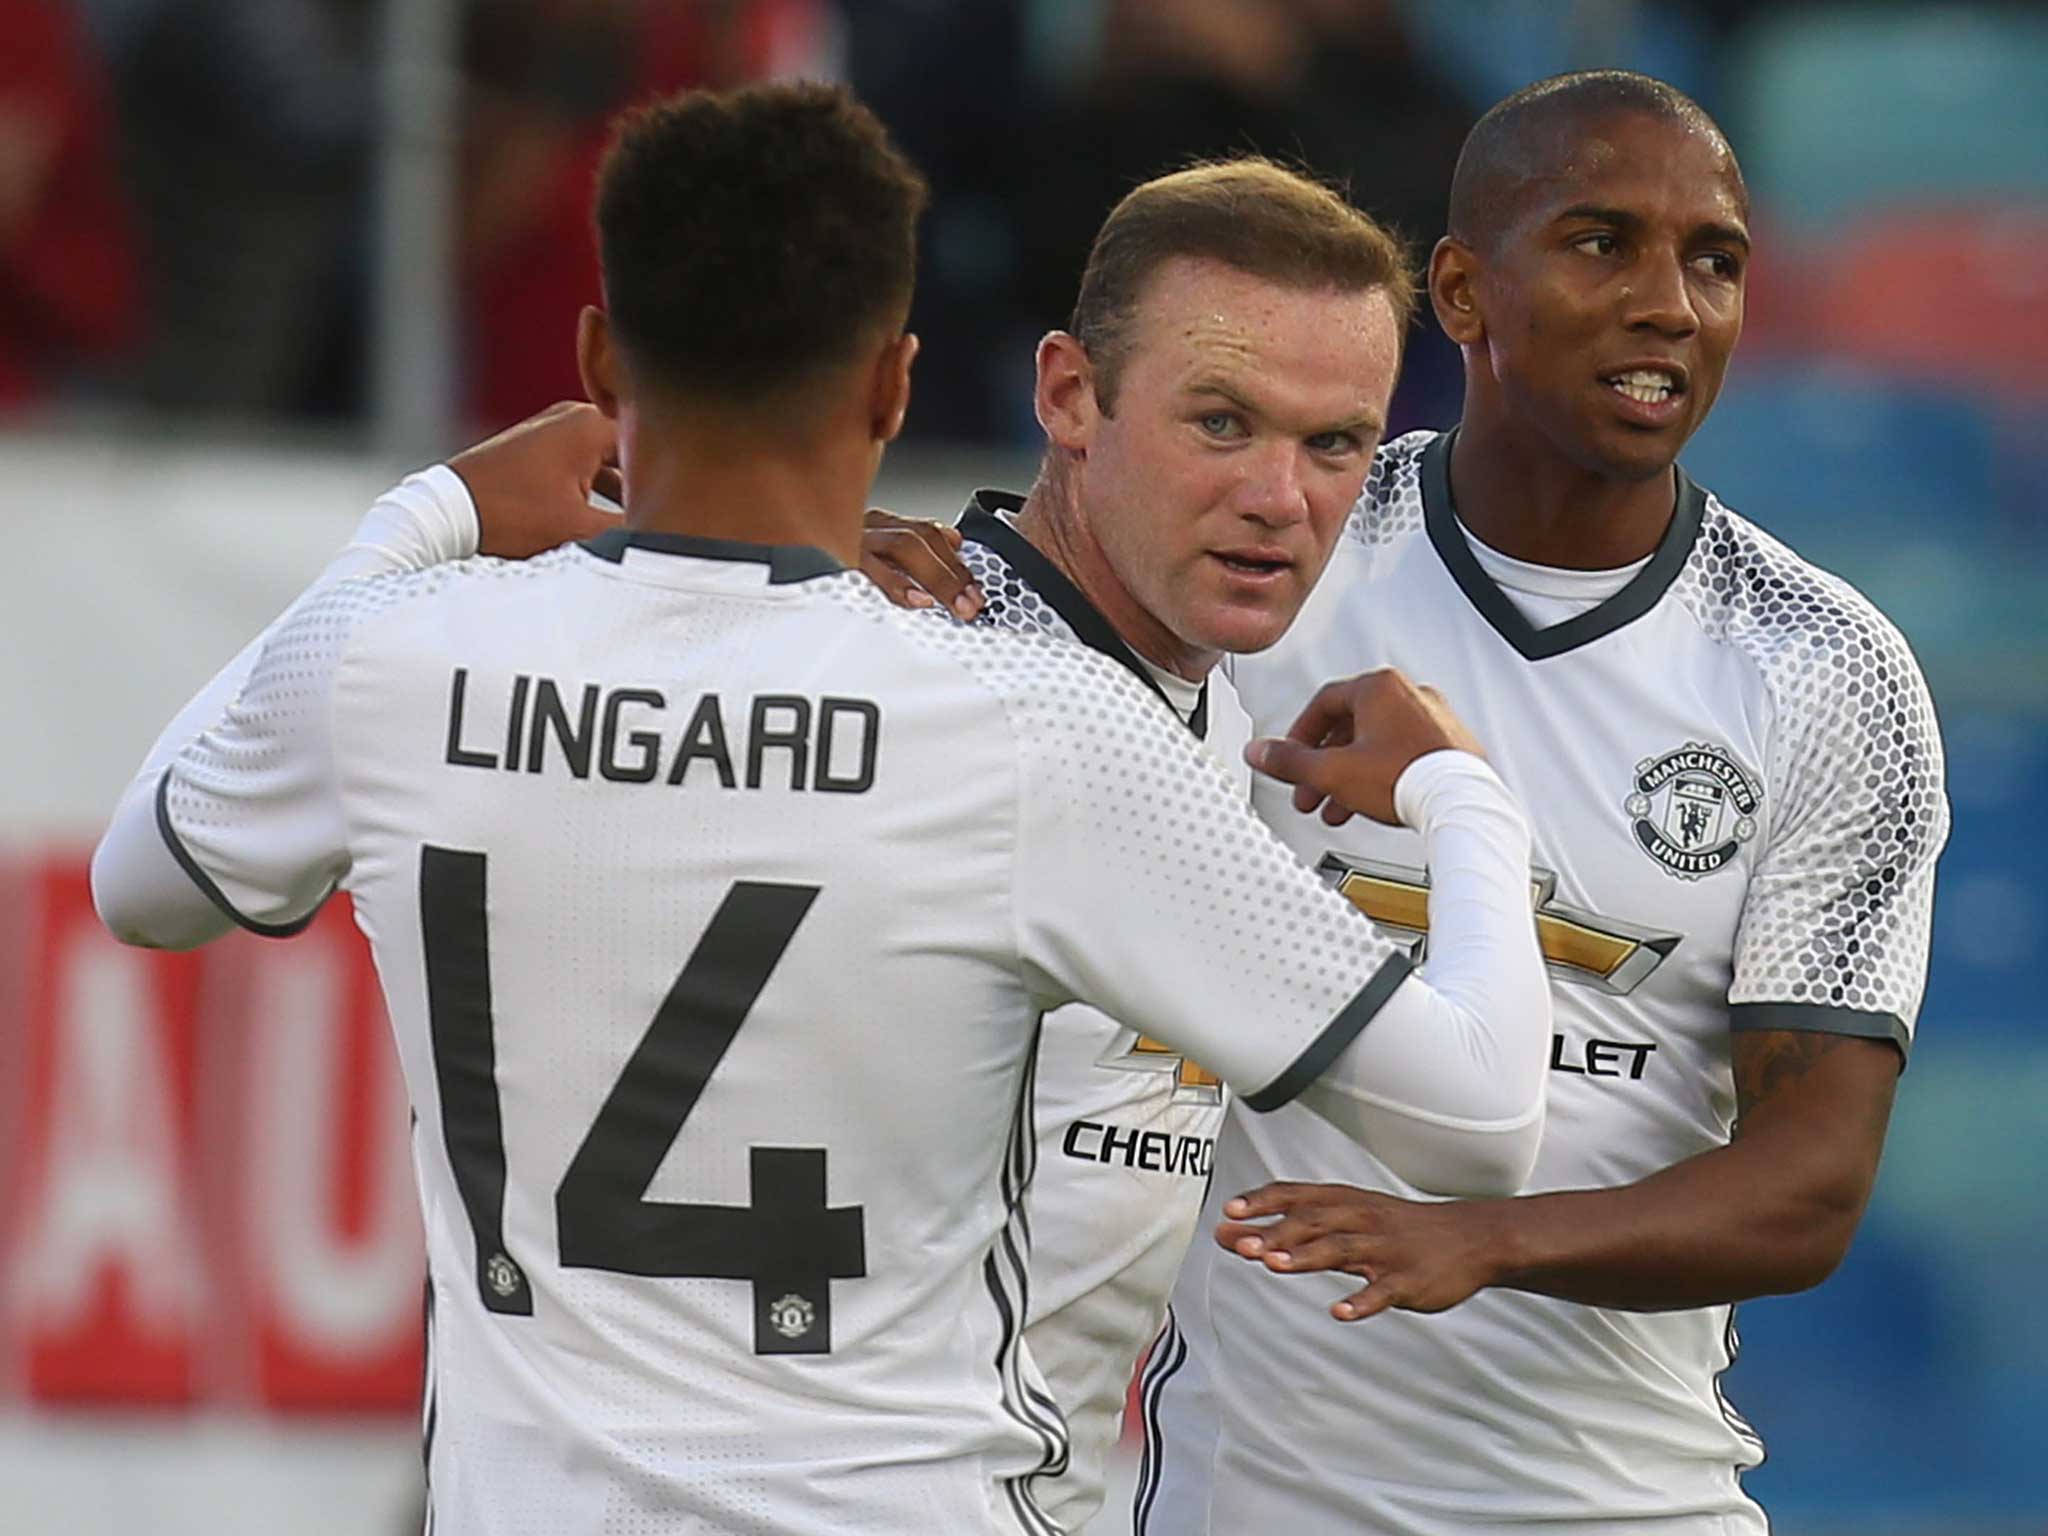 Wayne Rooney scored for Manchester United against Galatasaray in Sweden last week